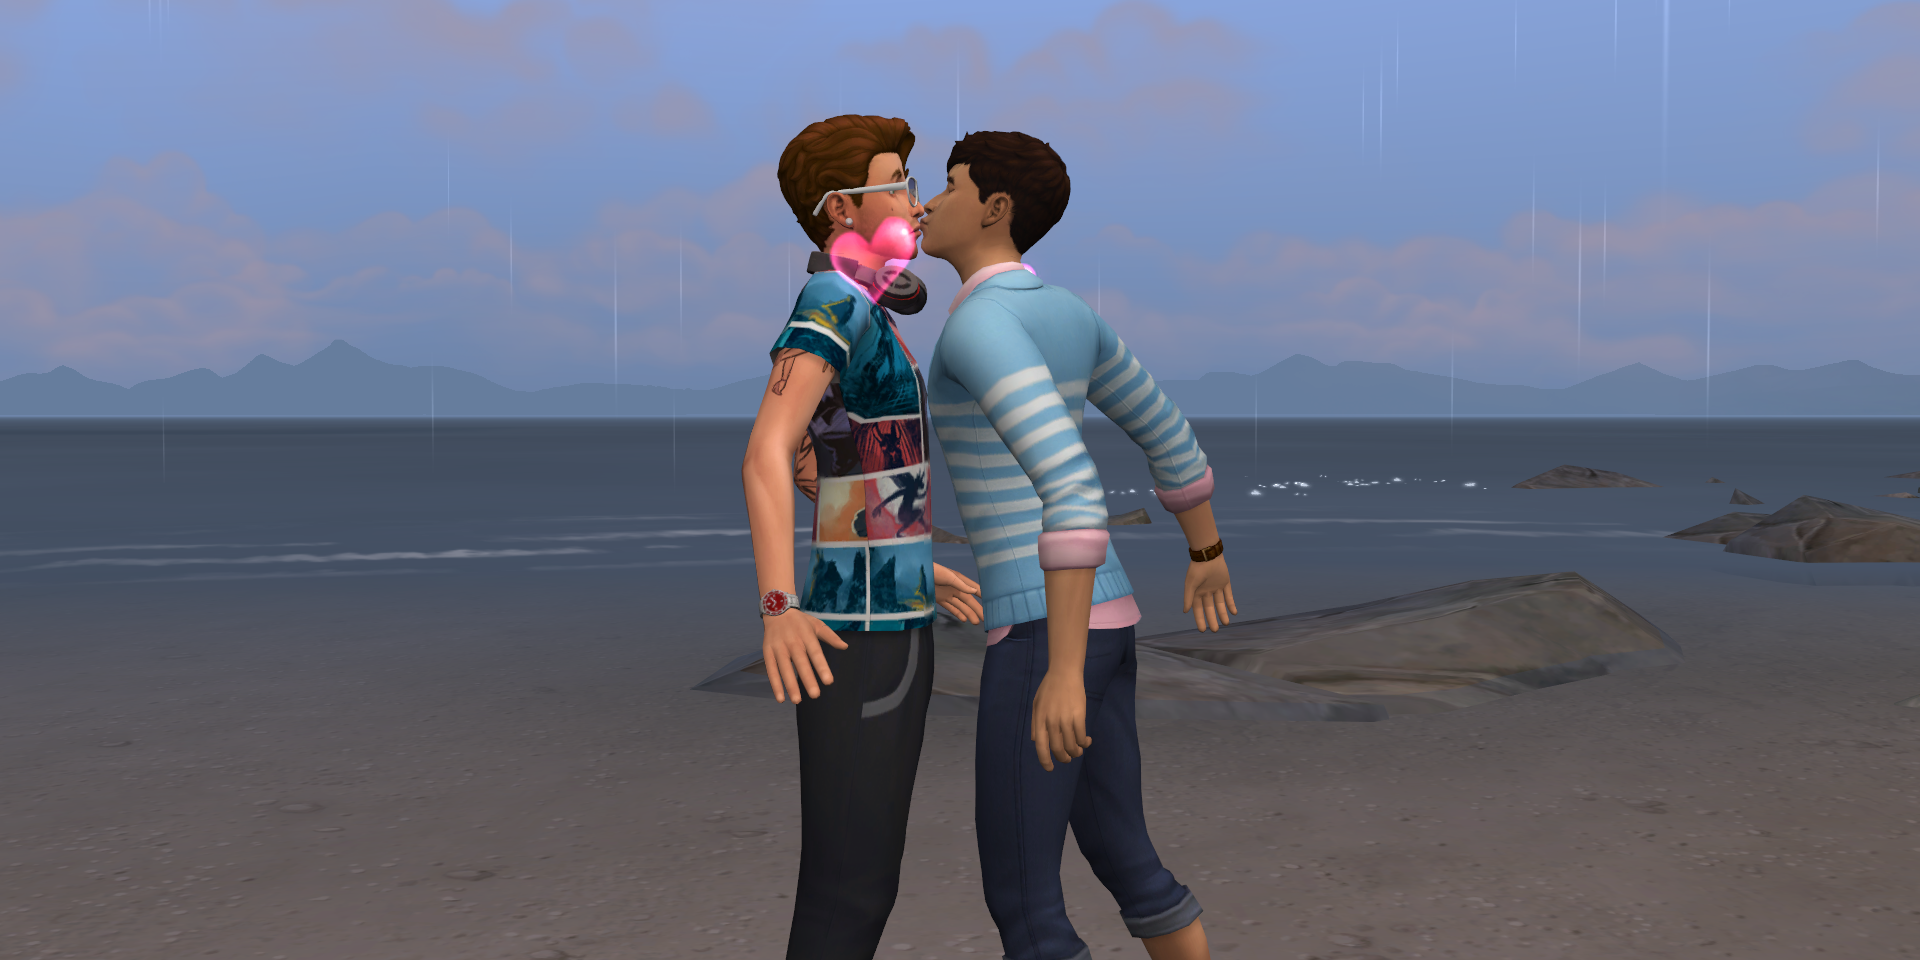 Two Sims share their first kiss on the beach in Windenburg